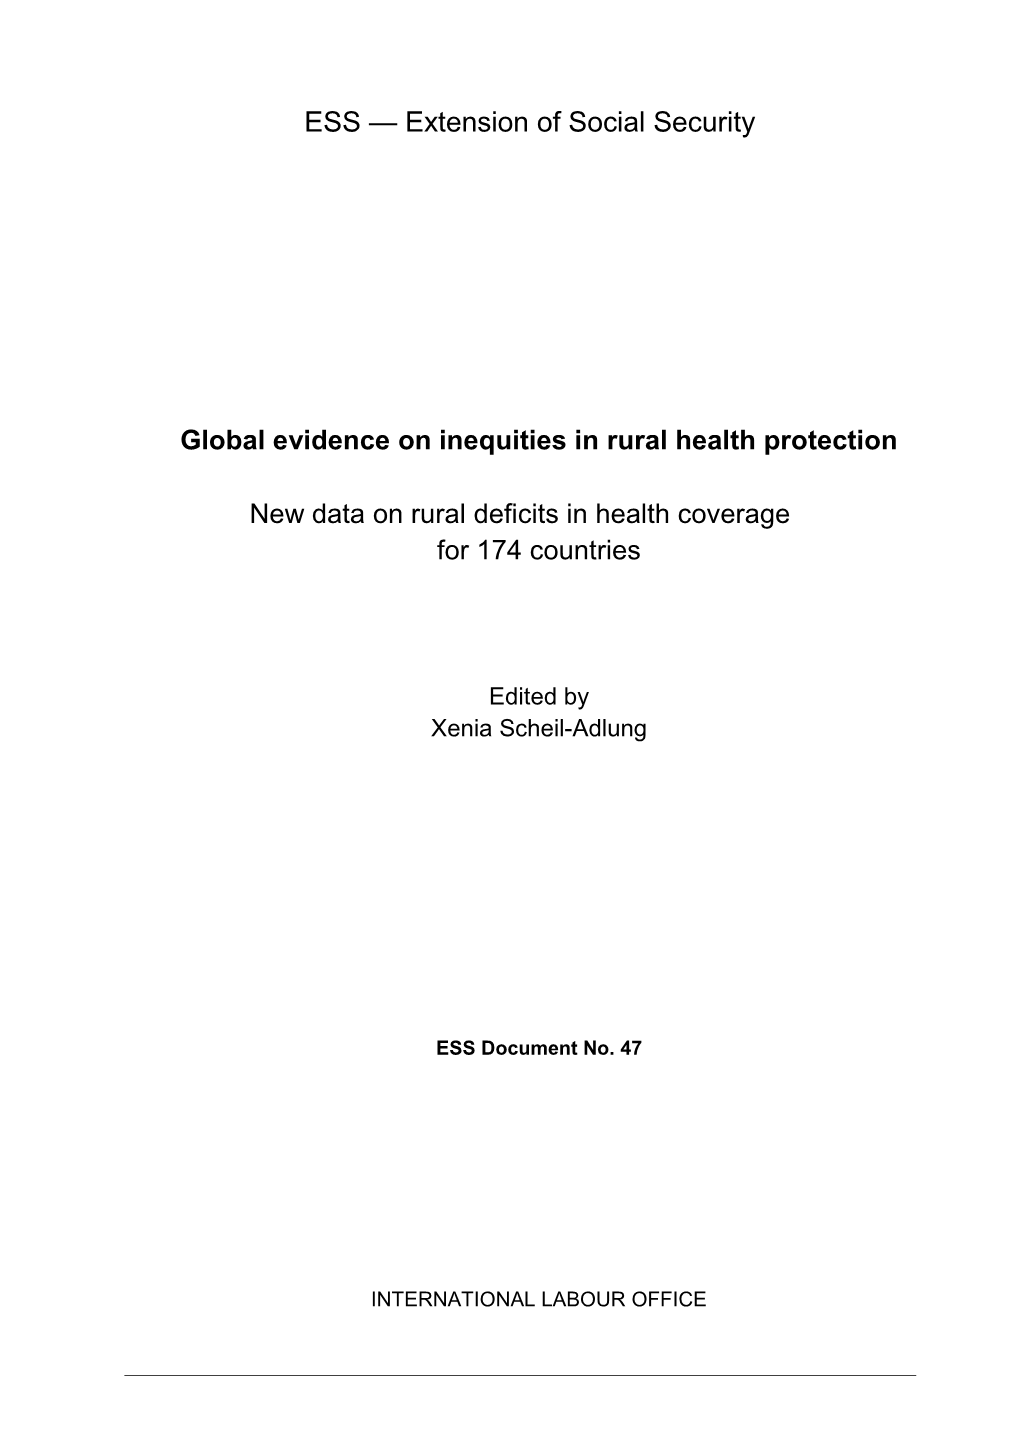 Global Evidence on Inequities in Rural Health Protection: New Data On